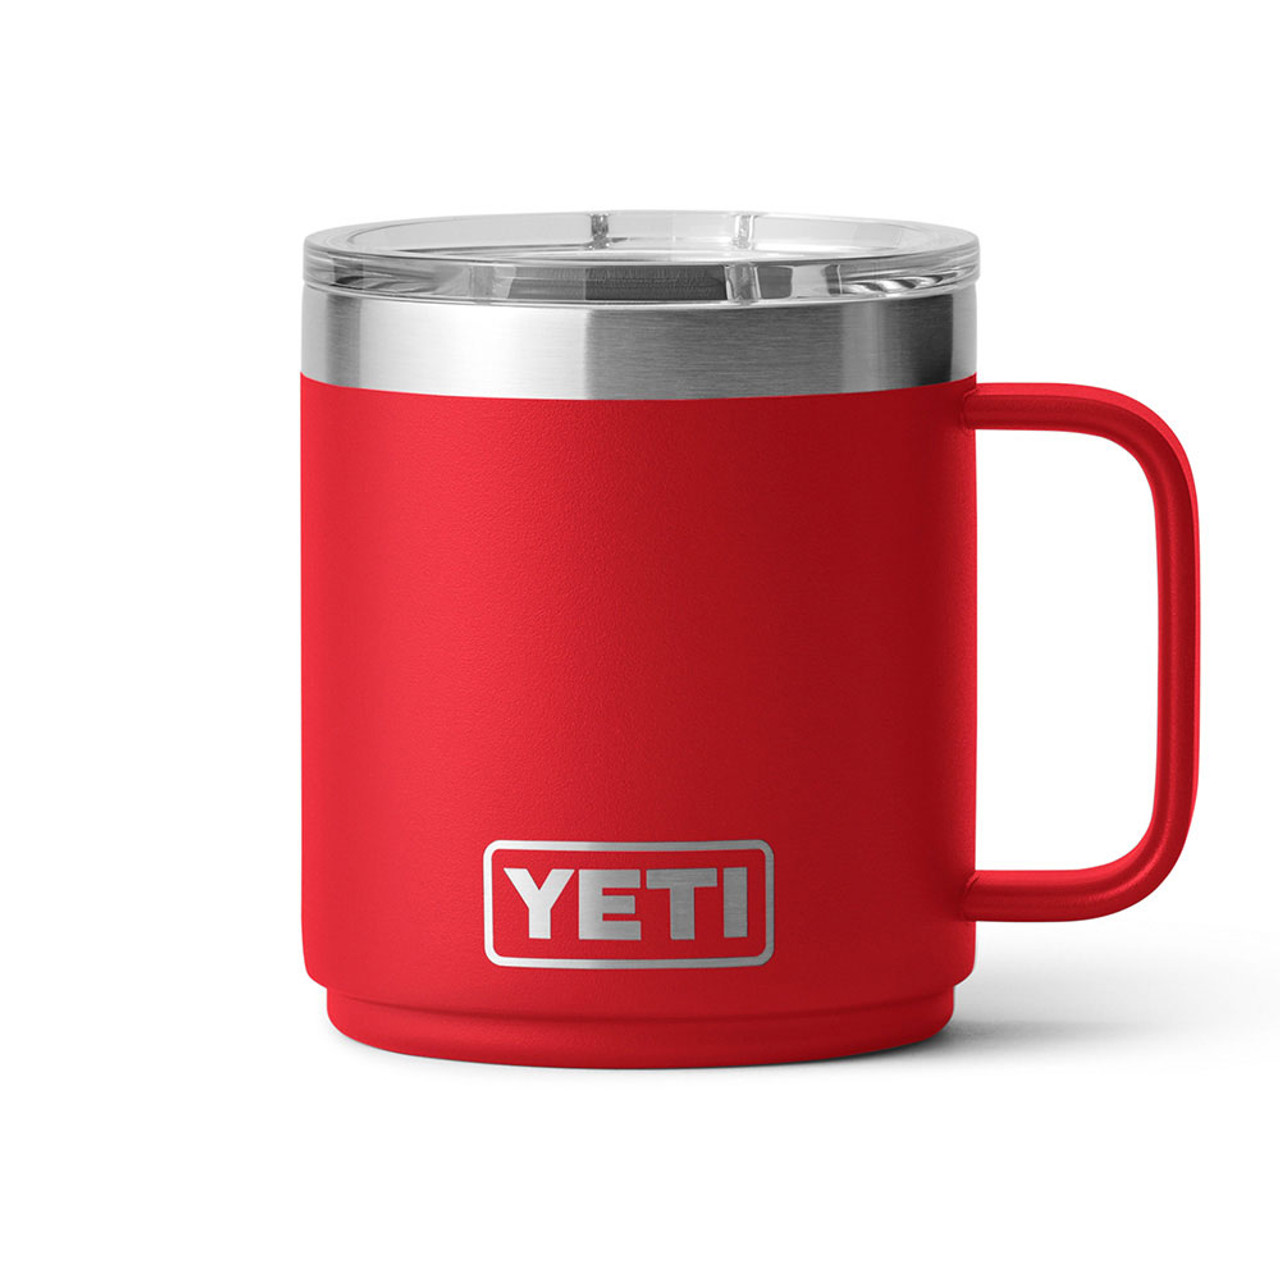 https://cdn11.bigcommerce.com/s-zut1msomd6/images/stencil/1280x1280/products/36605/235401/yeti-rambler-10-oz.-mug-21071501385-rescured-rescue-red-main__33063.1686768998.jpg?c=1